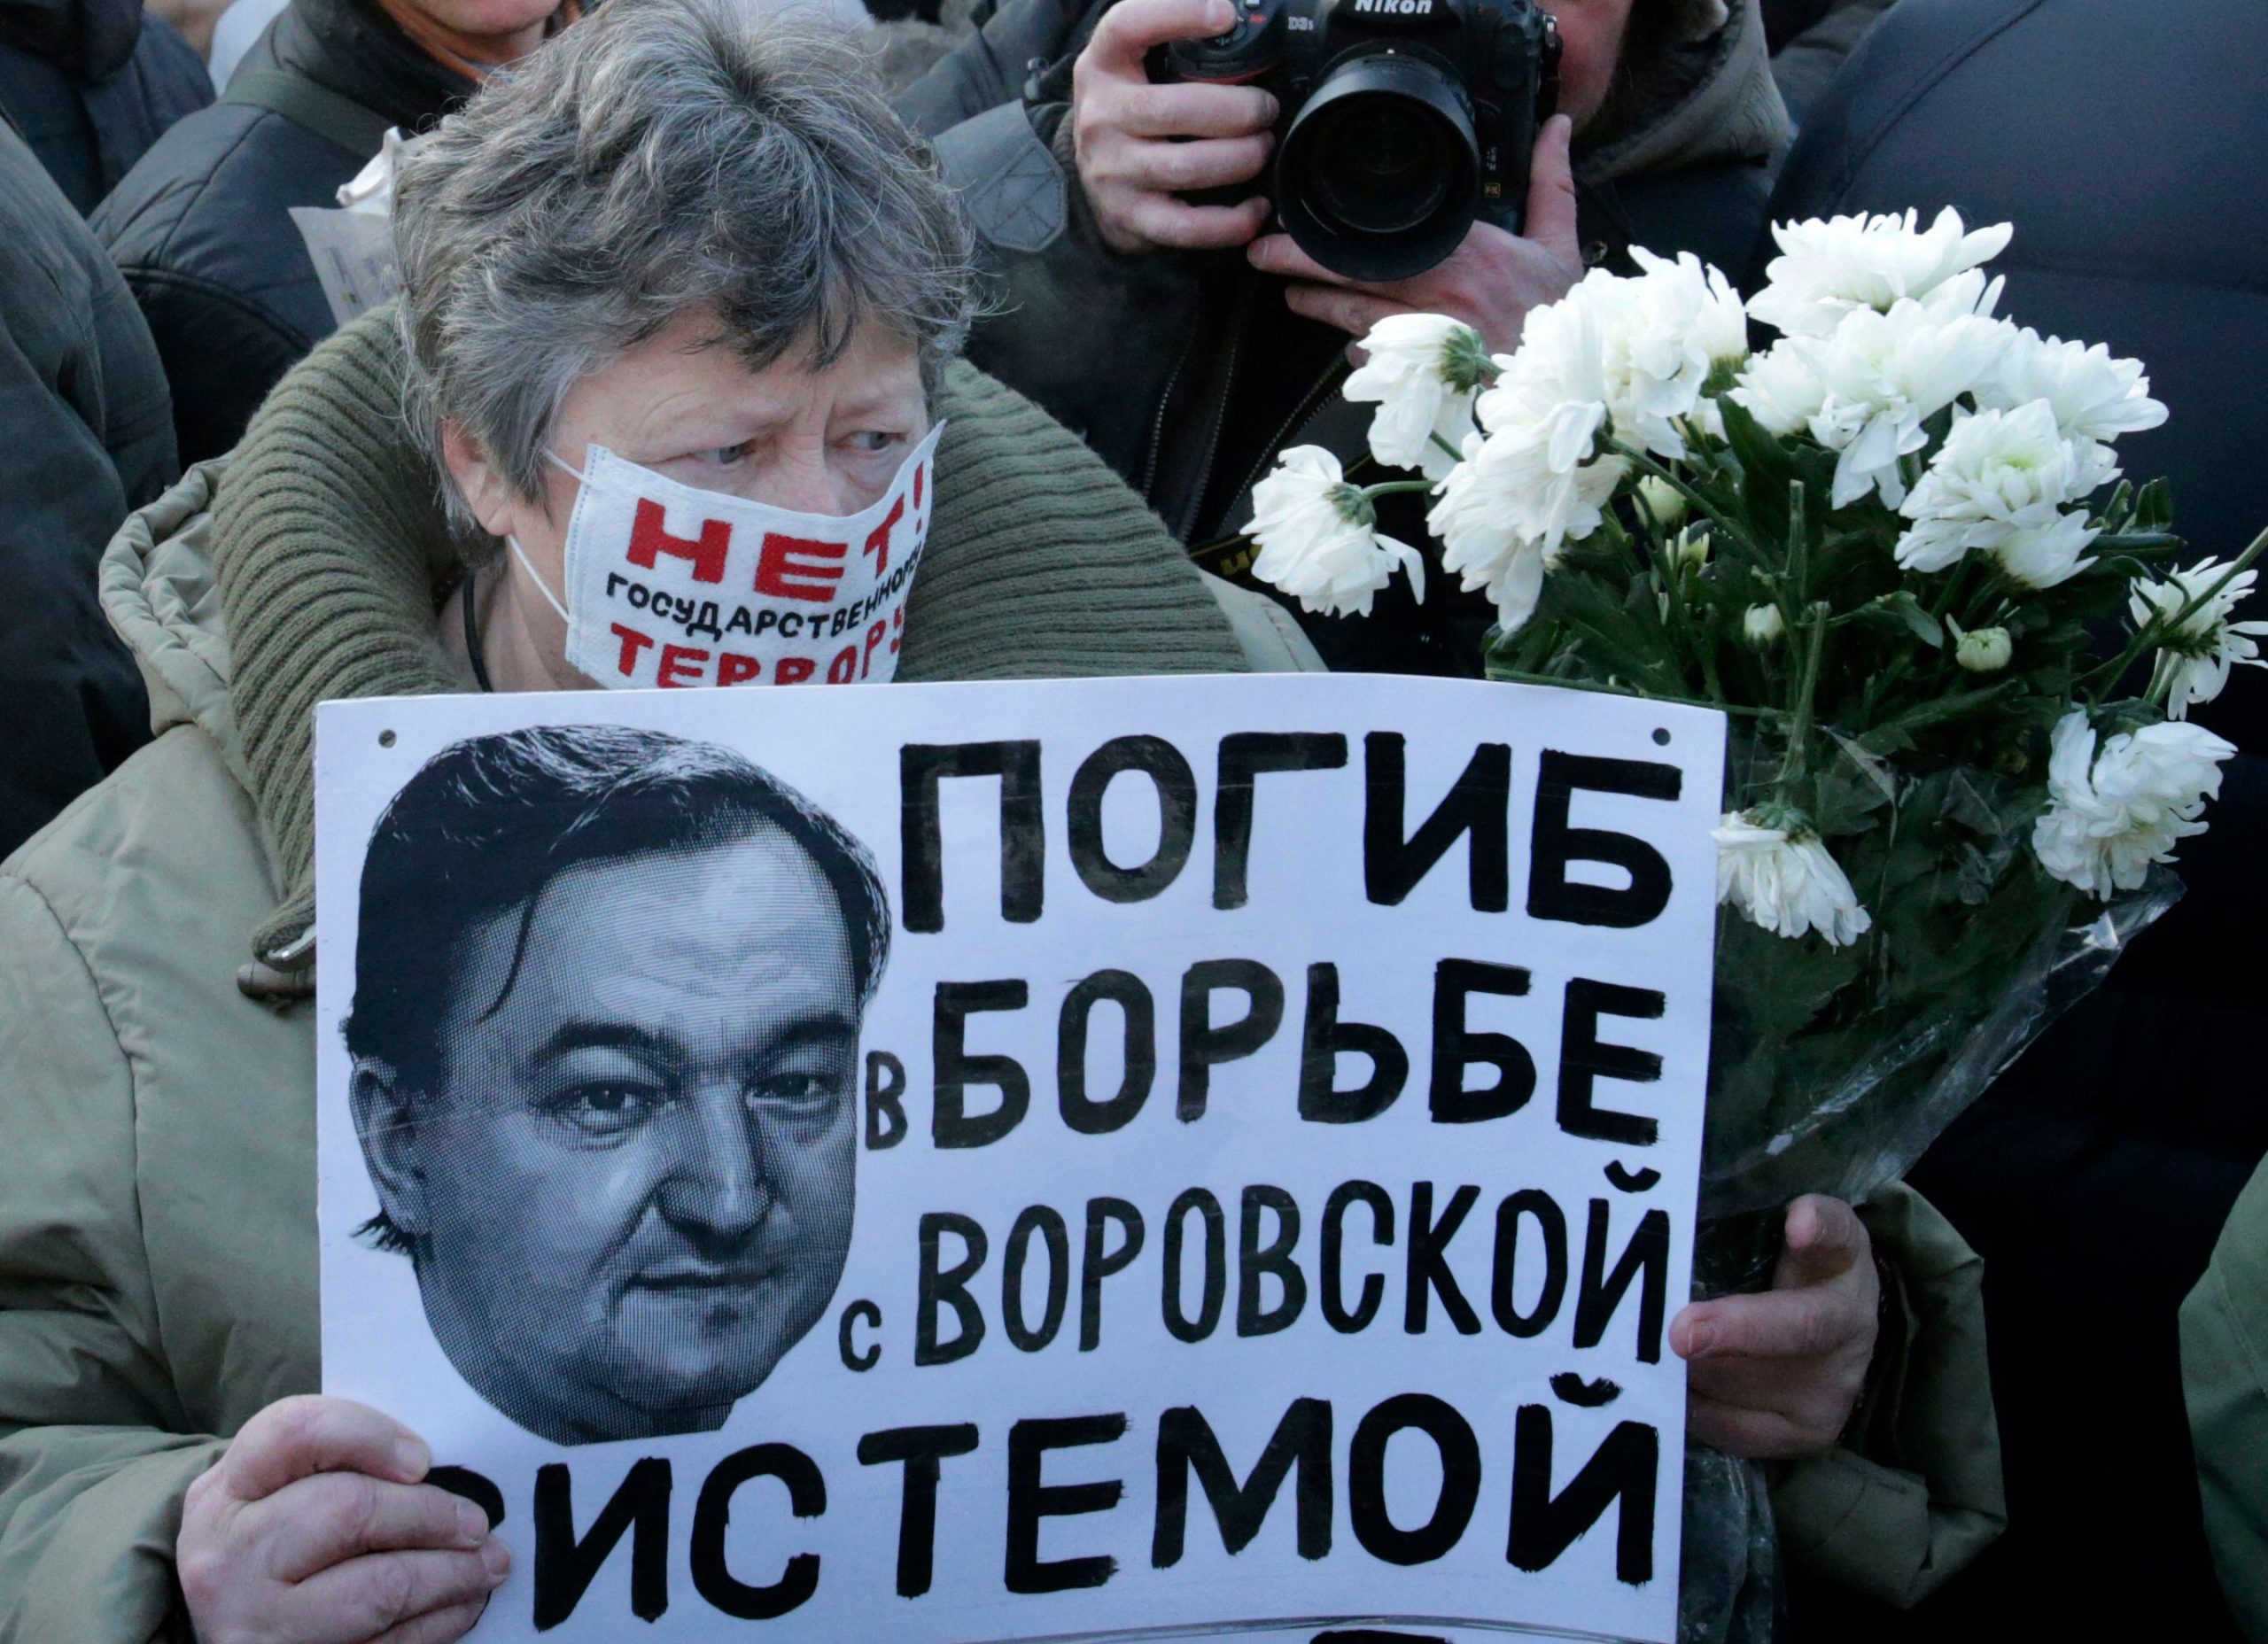 REDRESS Calls for the Use of Magnitsky Sanctions to Prevent Mass Atrocities